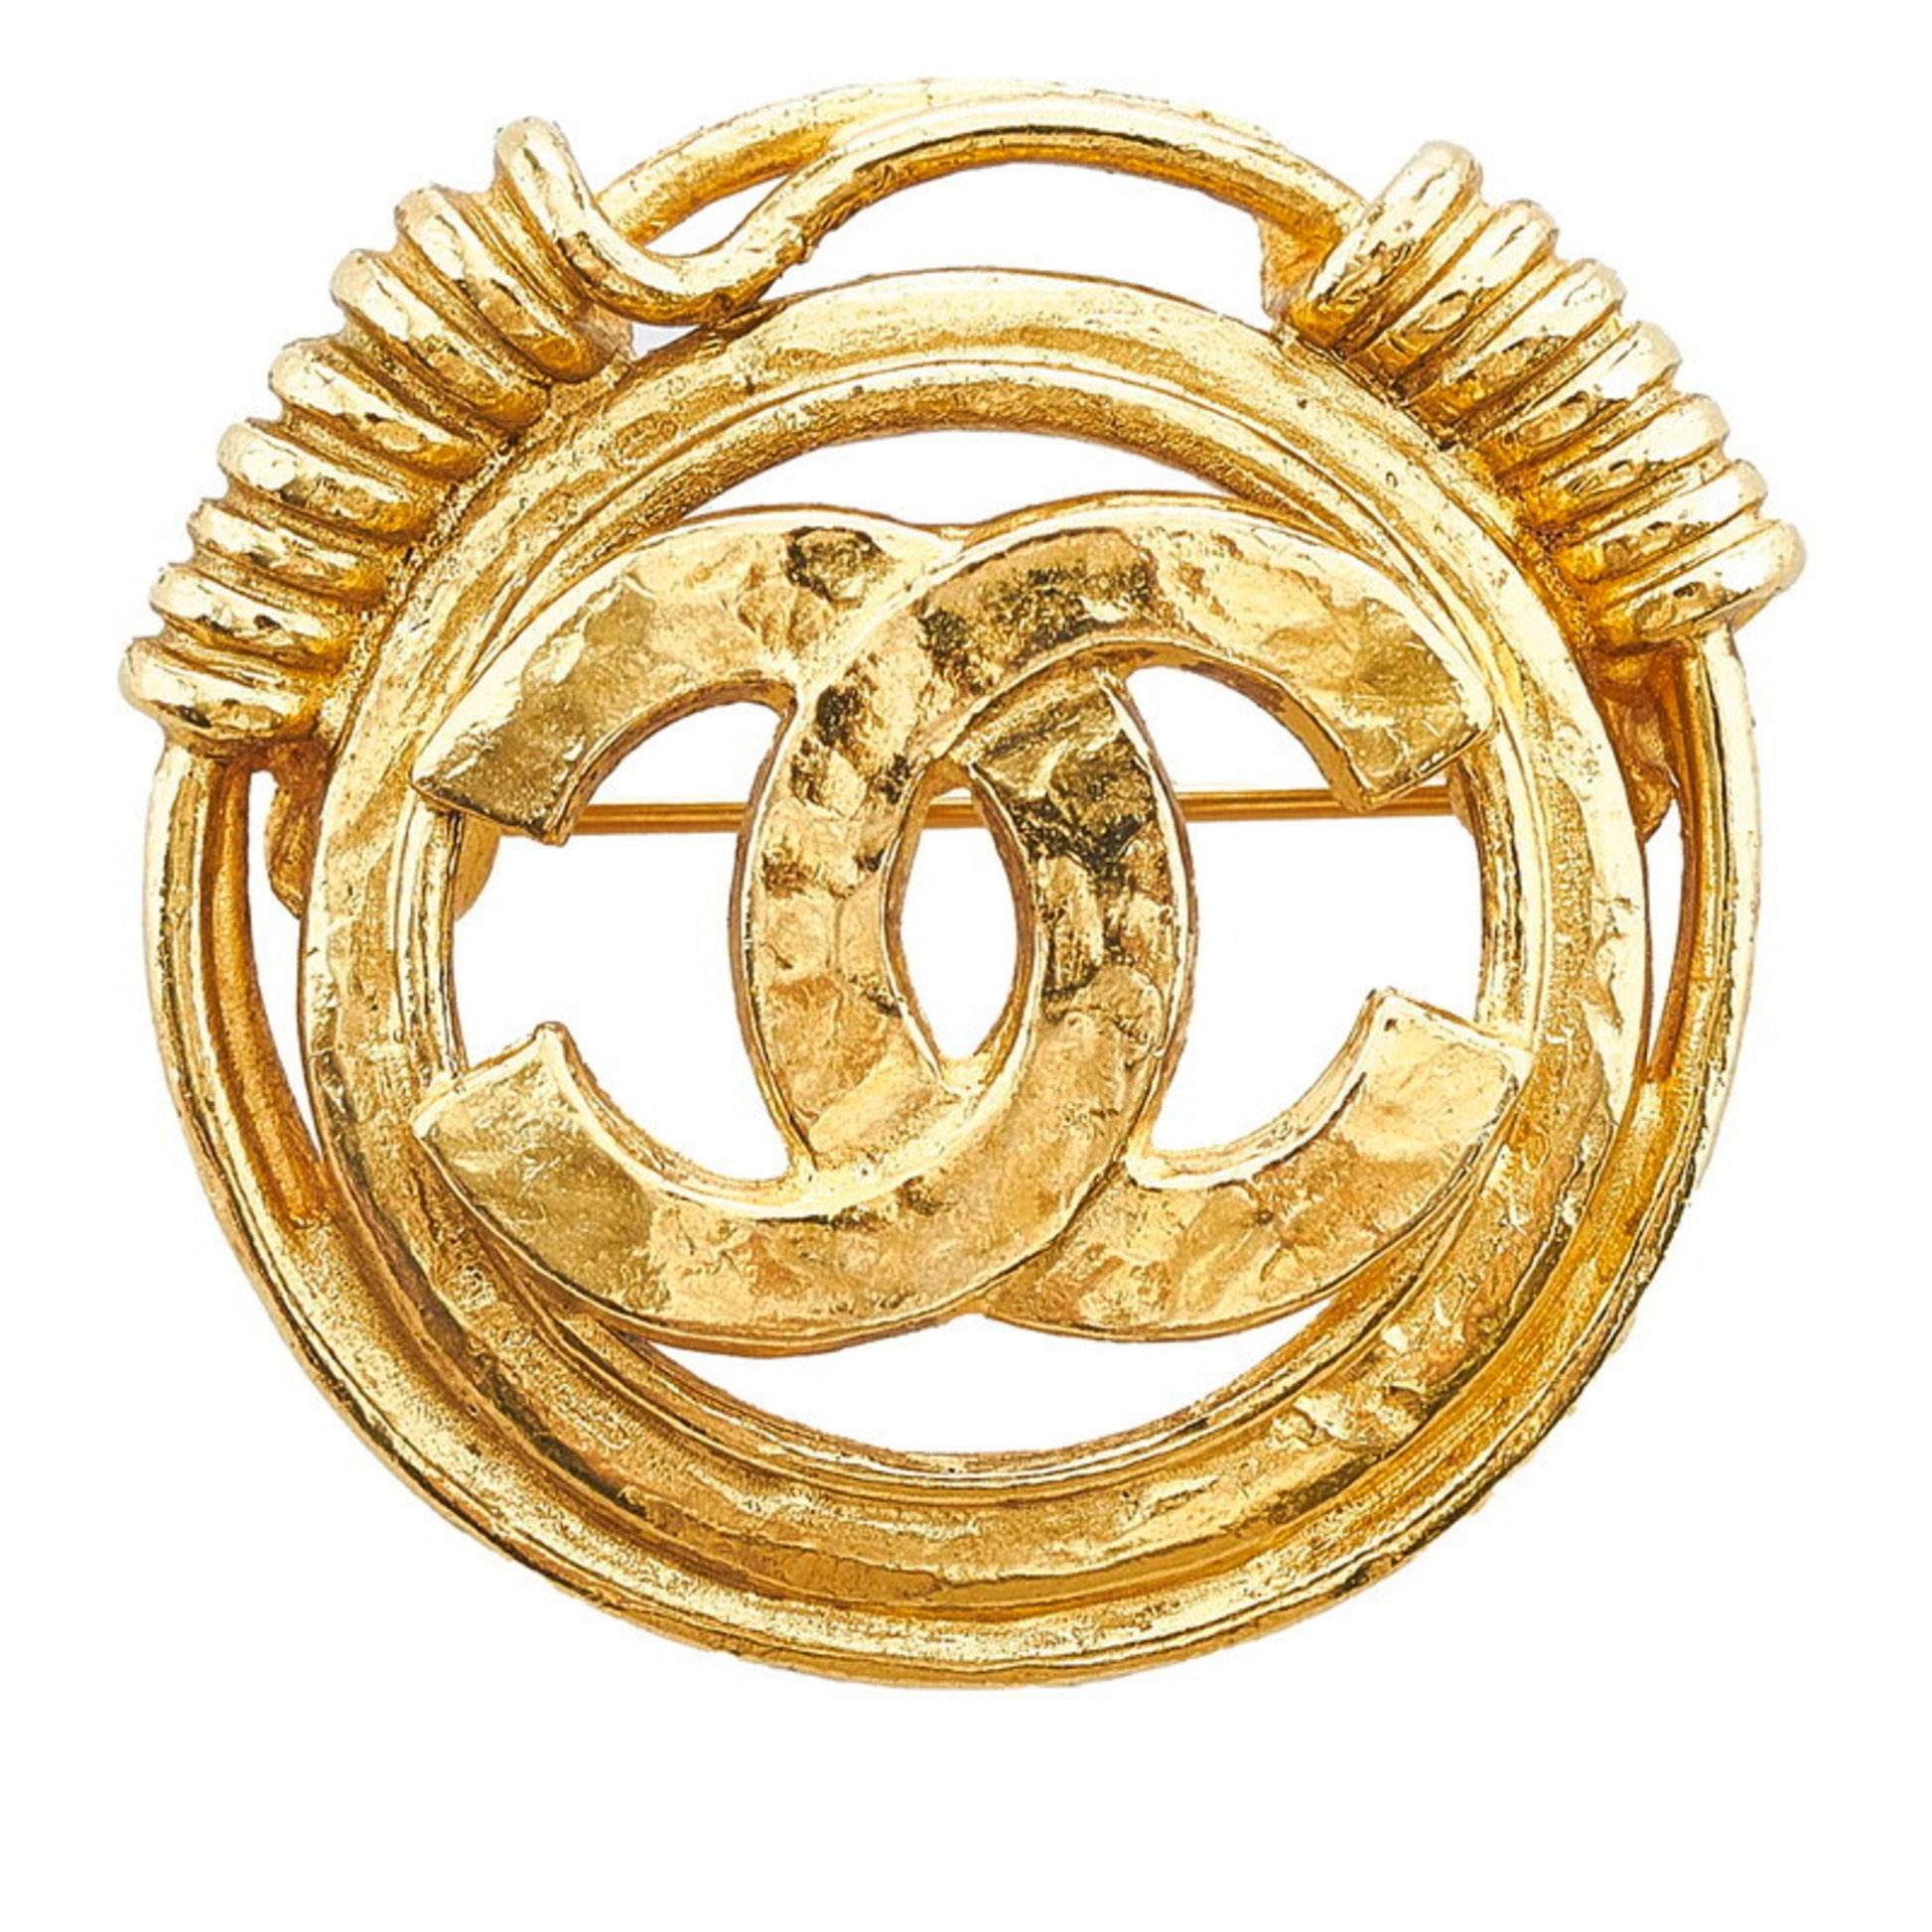 CHANEL coco mark brooch gold plated ladies